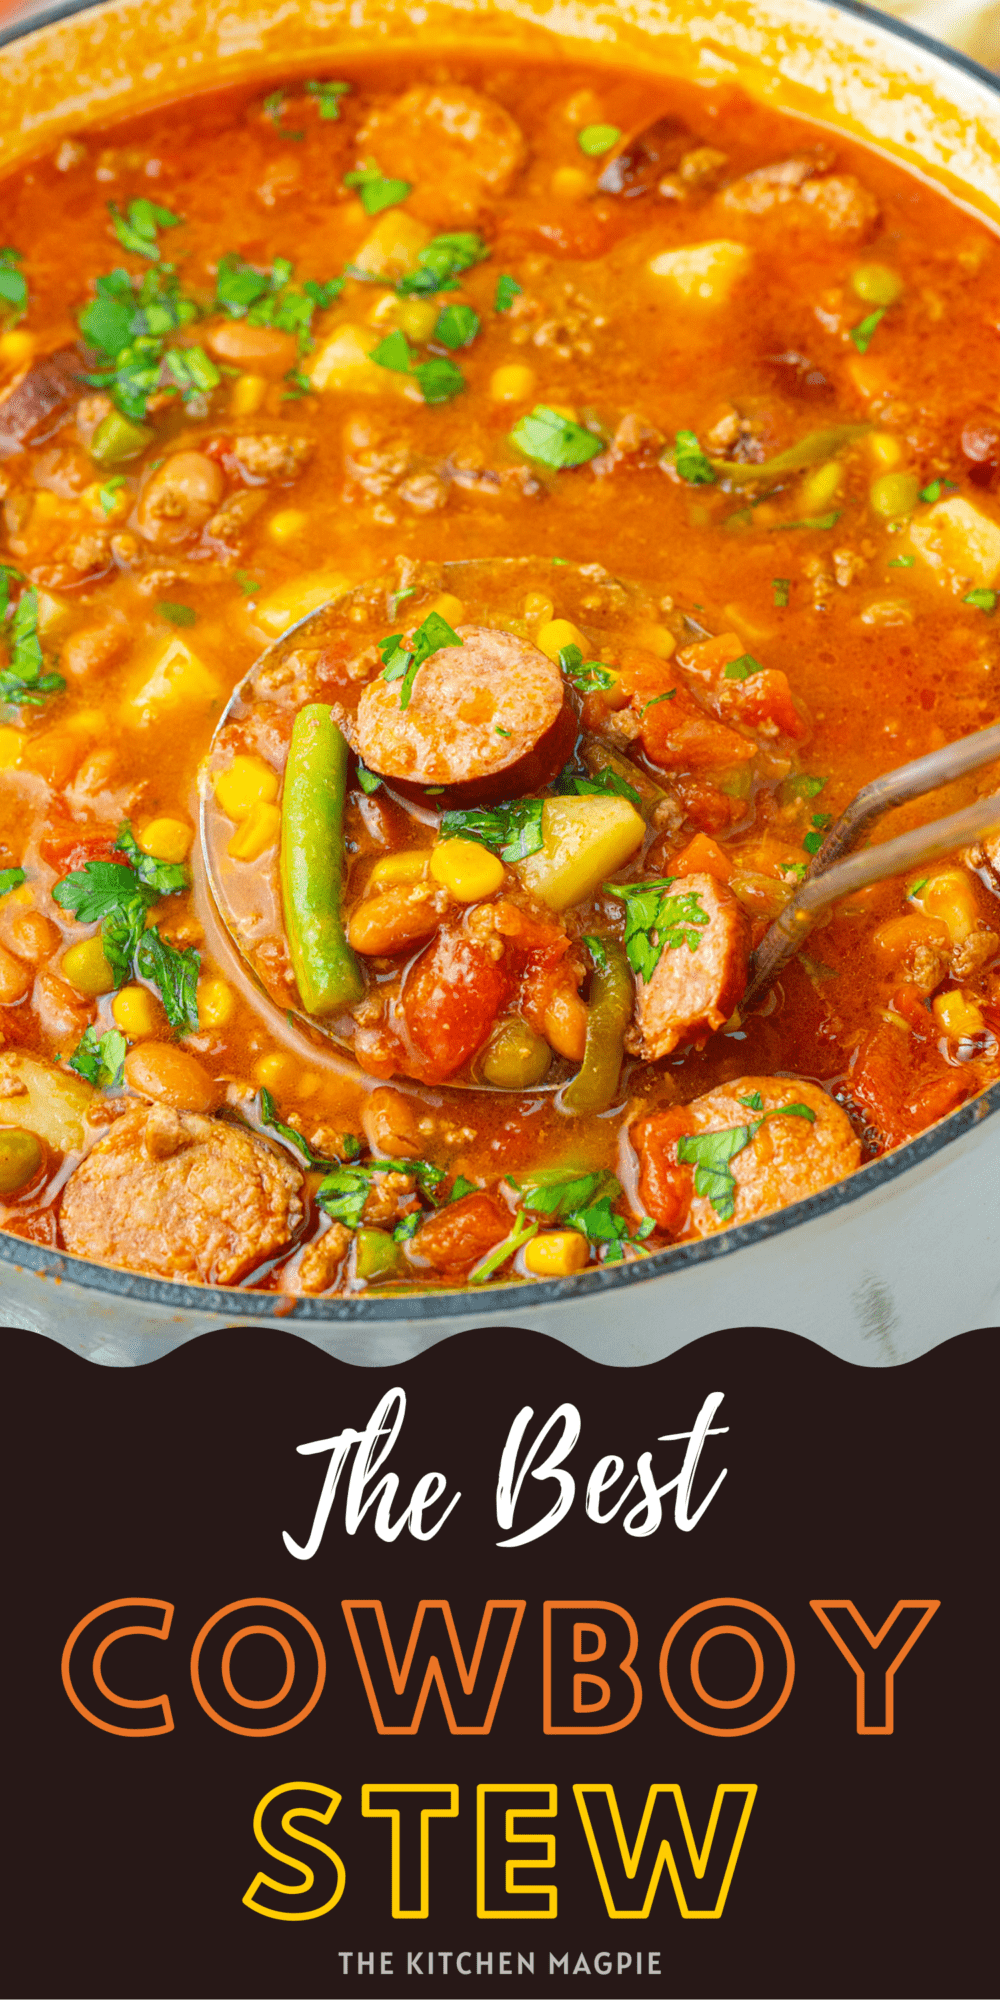 This large, hearty soup is a meal in a bowl! Ground beef, garlic sausage and vegetables are simmered together until it's soup perfection. Serve with cornbread for the perfect meal.